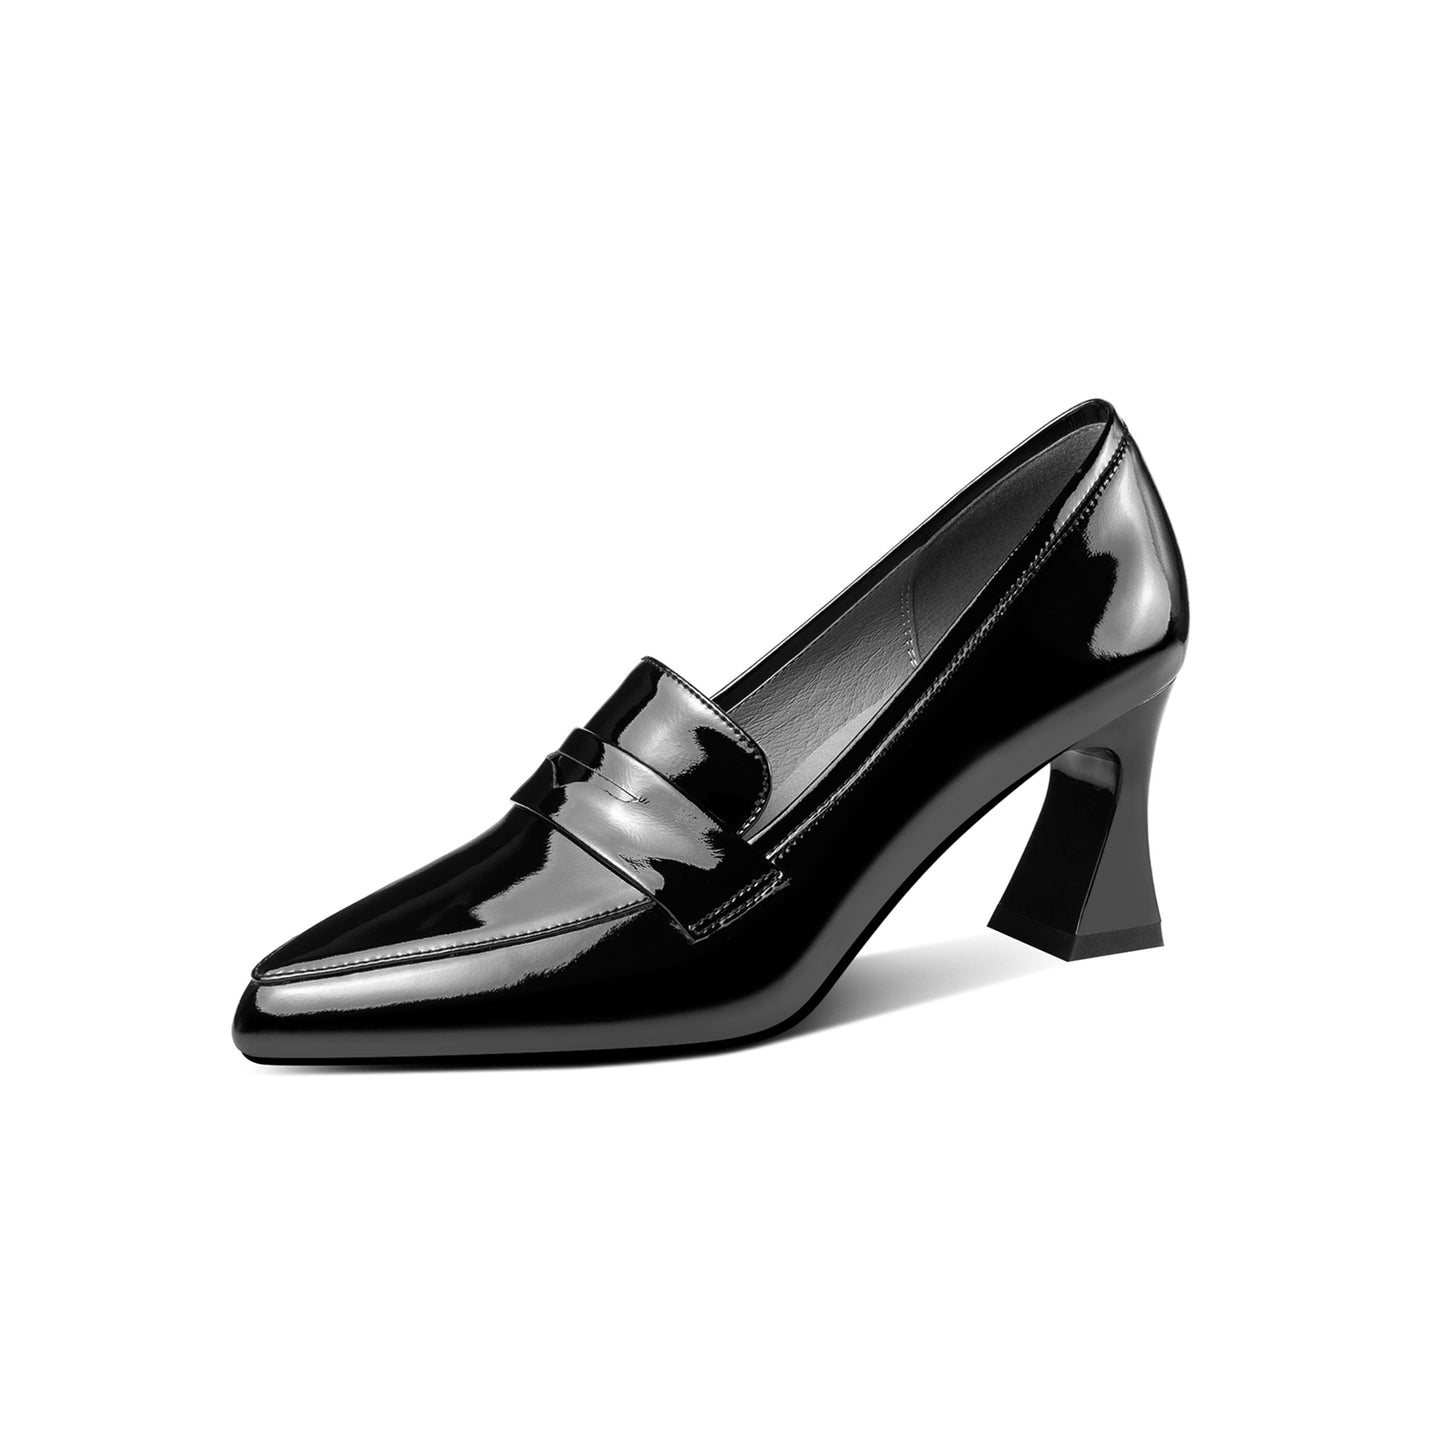 TinaCus Women's Handmade Glossy Patent Leather Spool Heel Pointy Toe Pumps with Modern Assorted Color